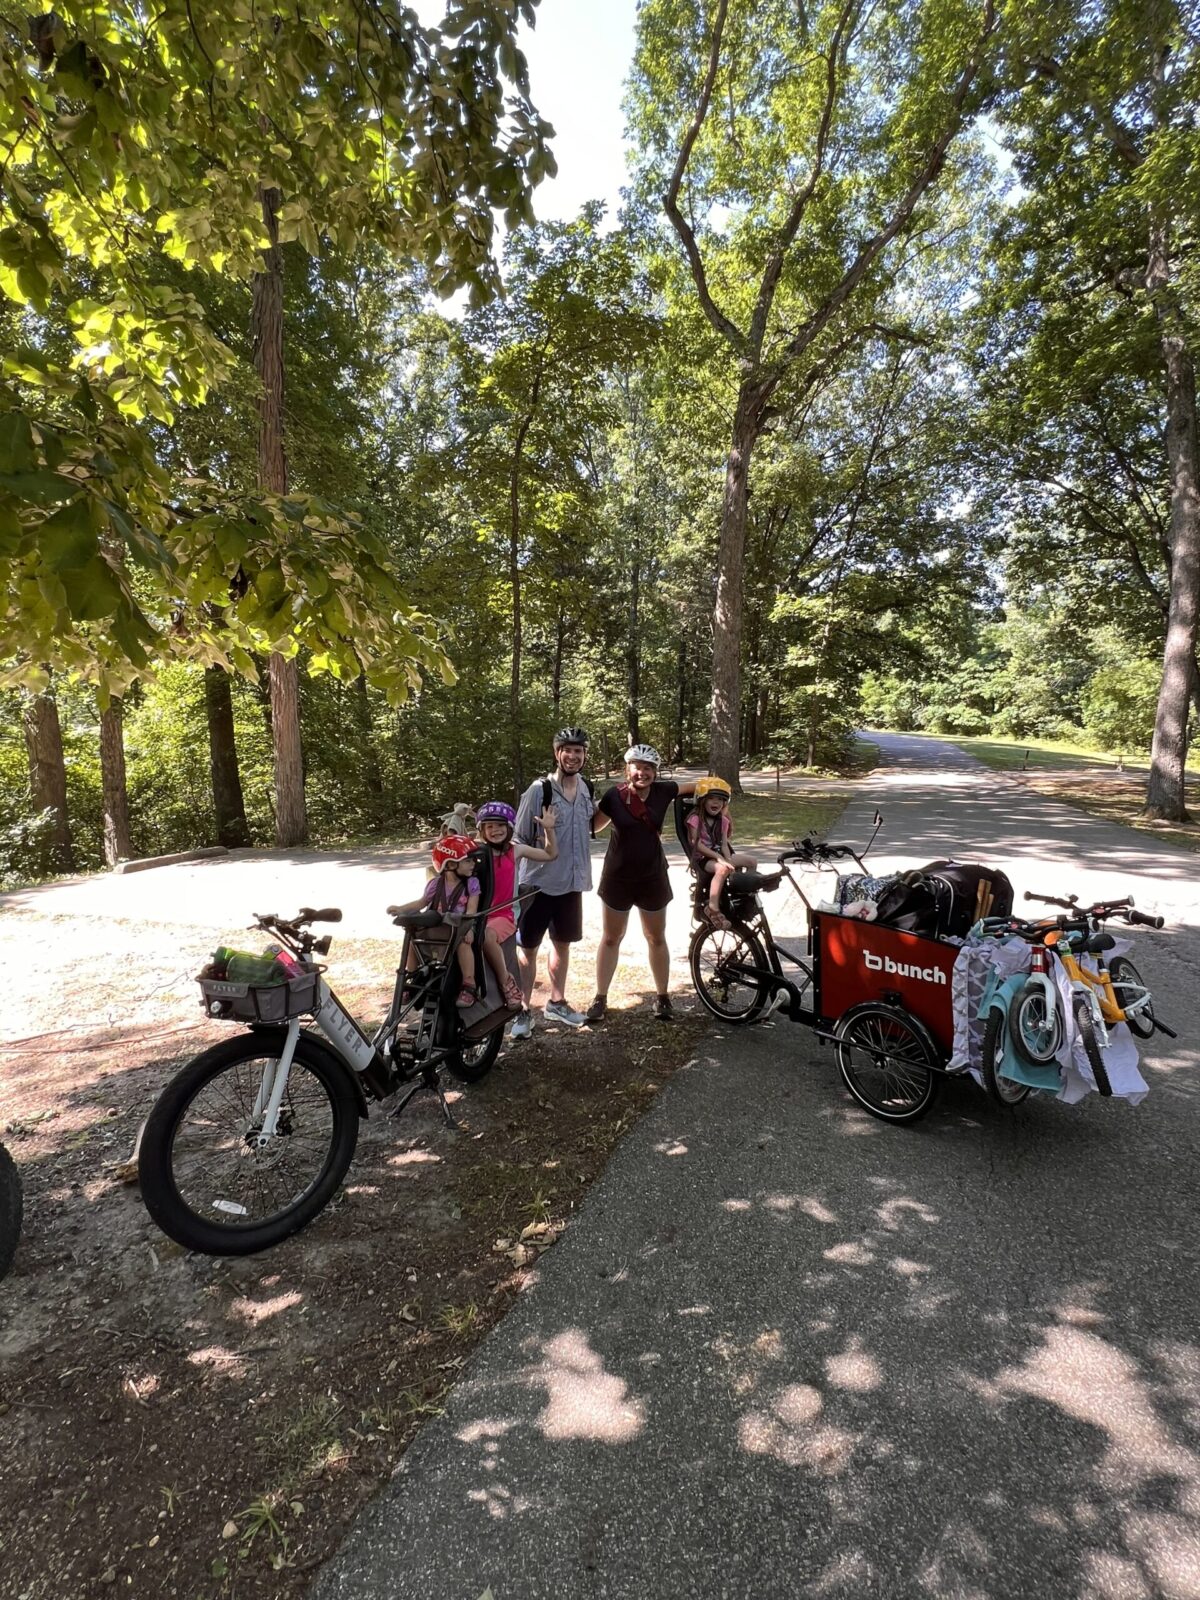 About to leave our camp site! Mark rode the RadioFlyer eBike, while I rode our Bunch Bike cargo eBike. 